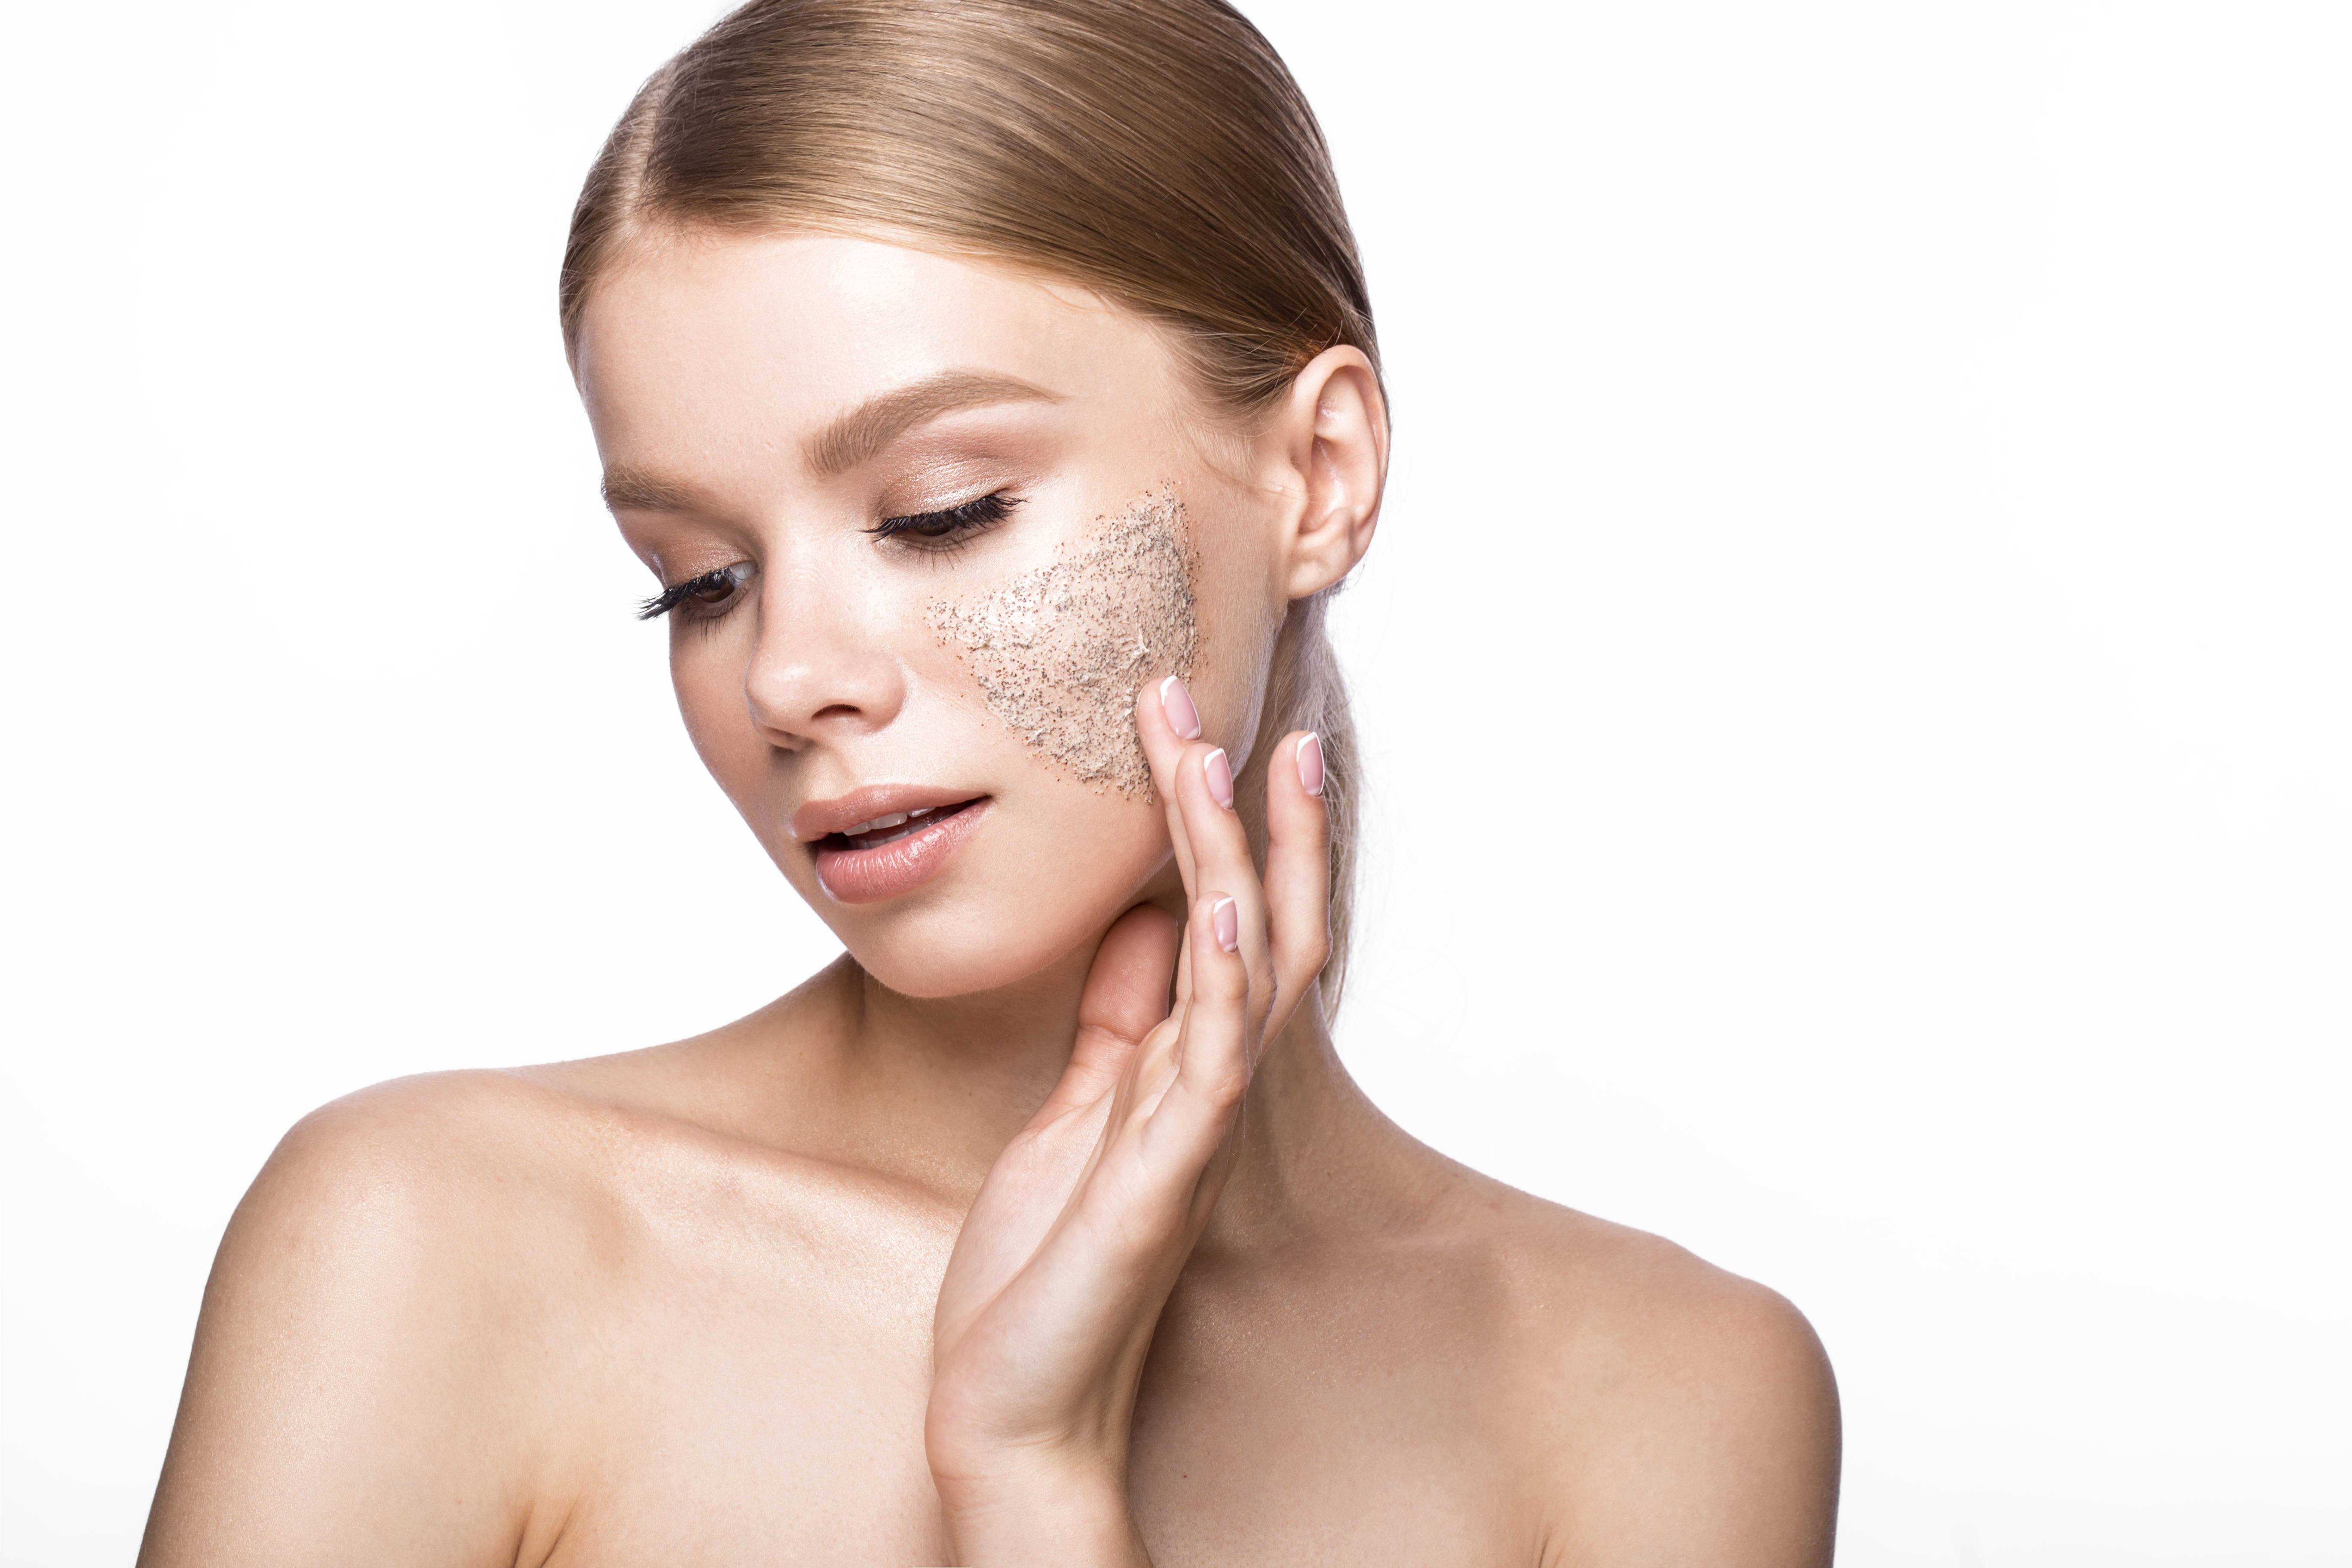 Face Hair Removal: Do's and Don'ts